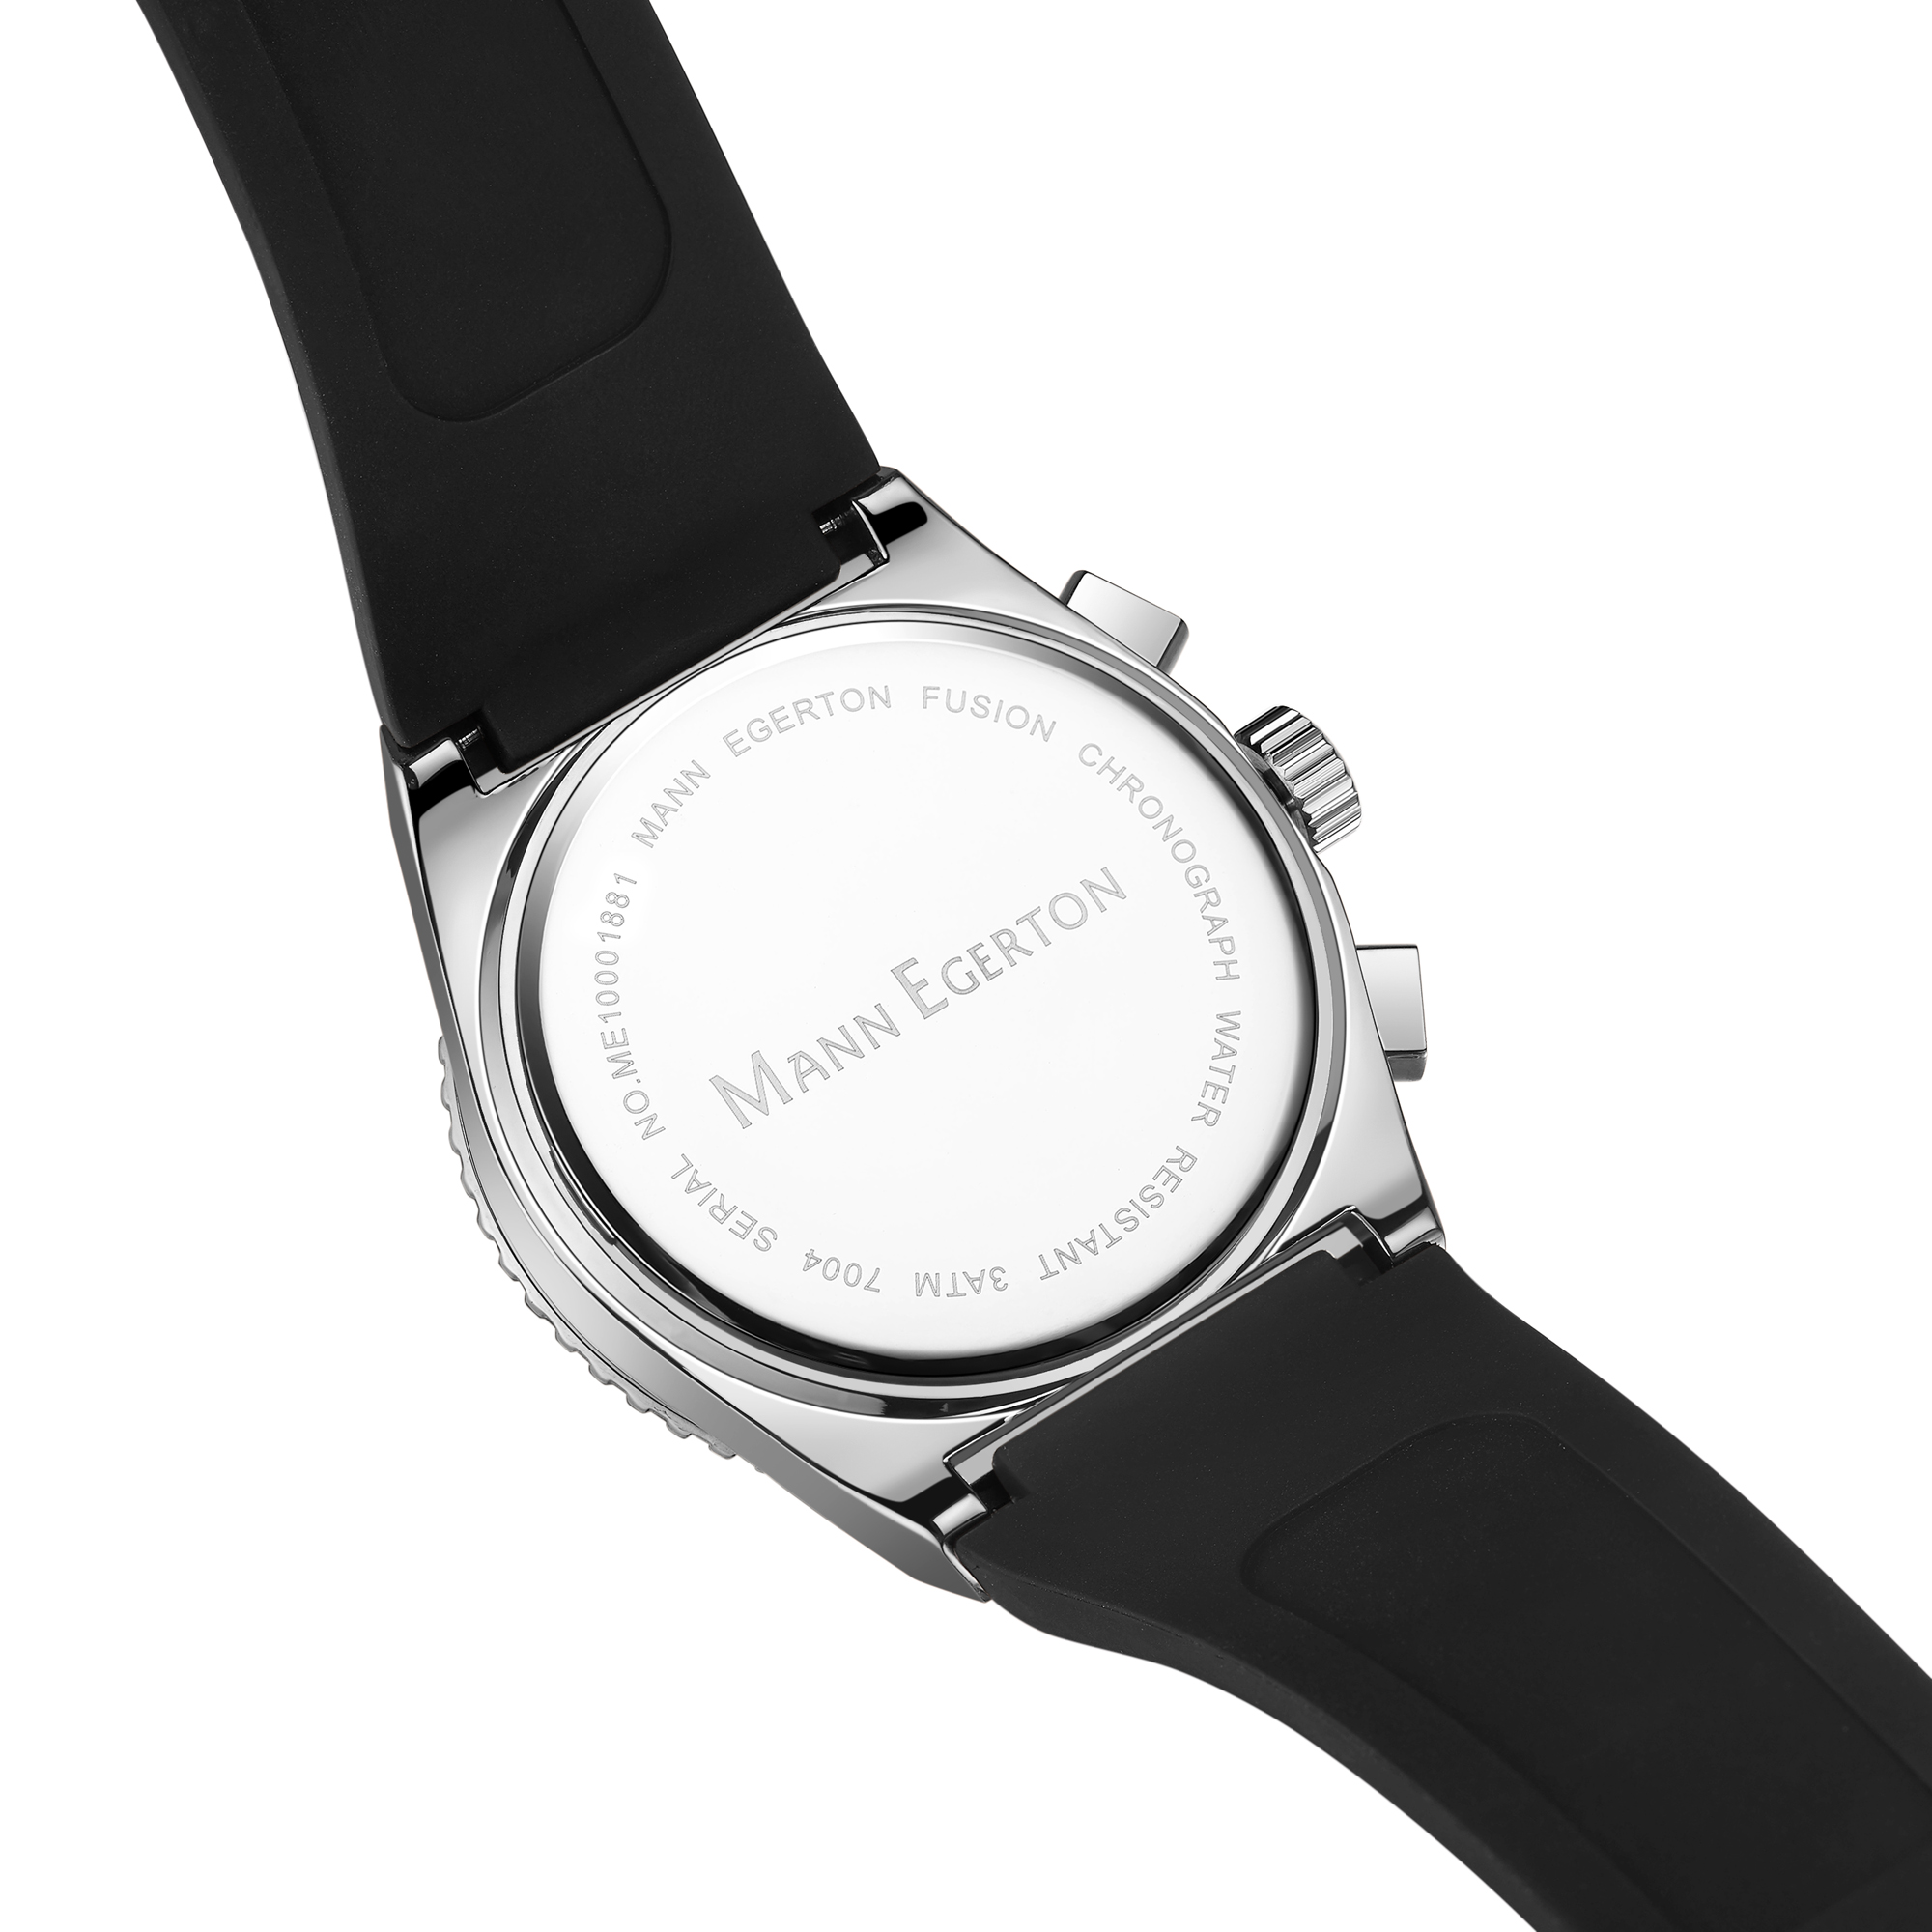 Mann Egerton Hand Assembled Fusion Steel Watch - FREE DELIVERY & 5 YEAR WARRANTY - Image 3 of 5